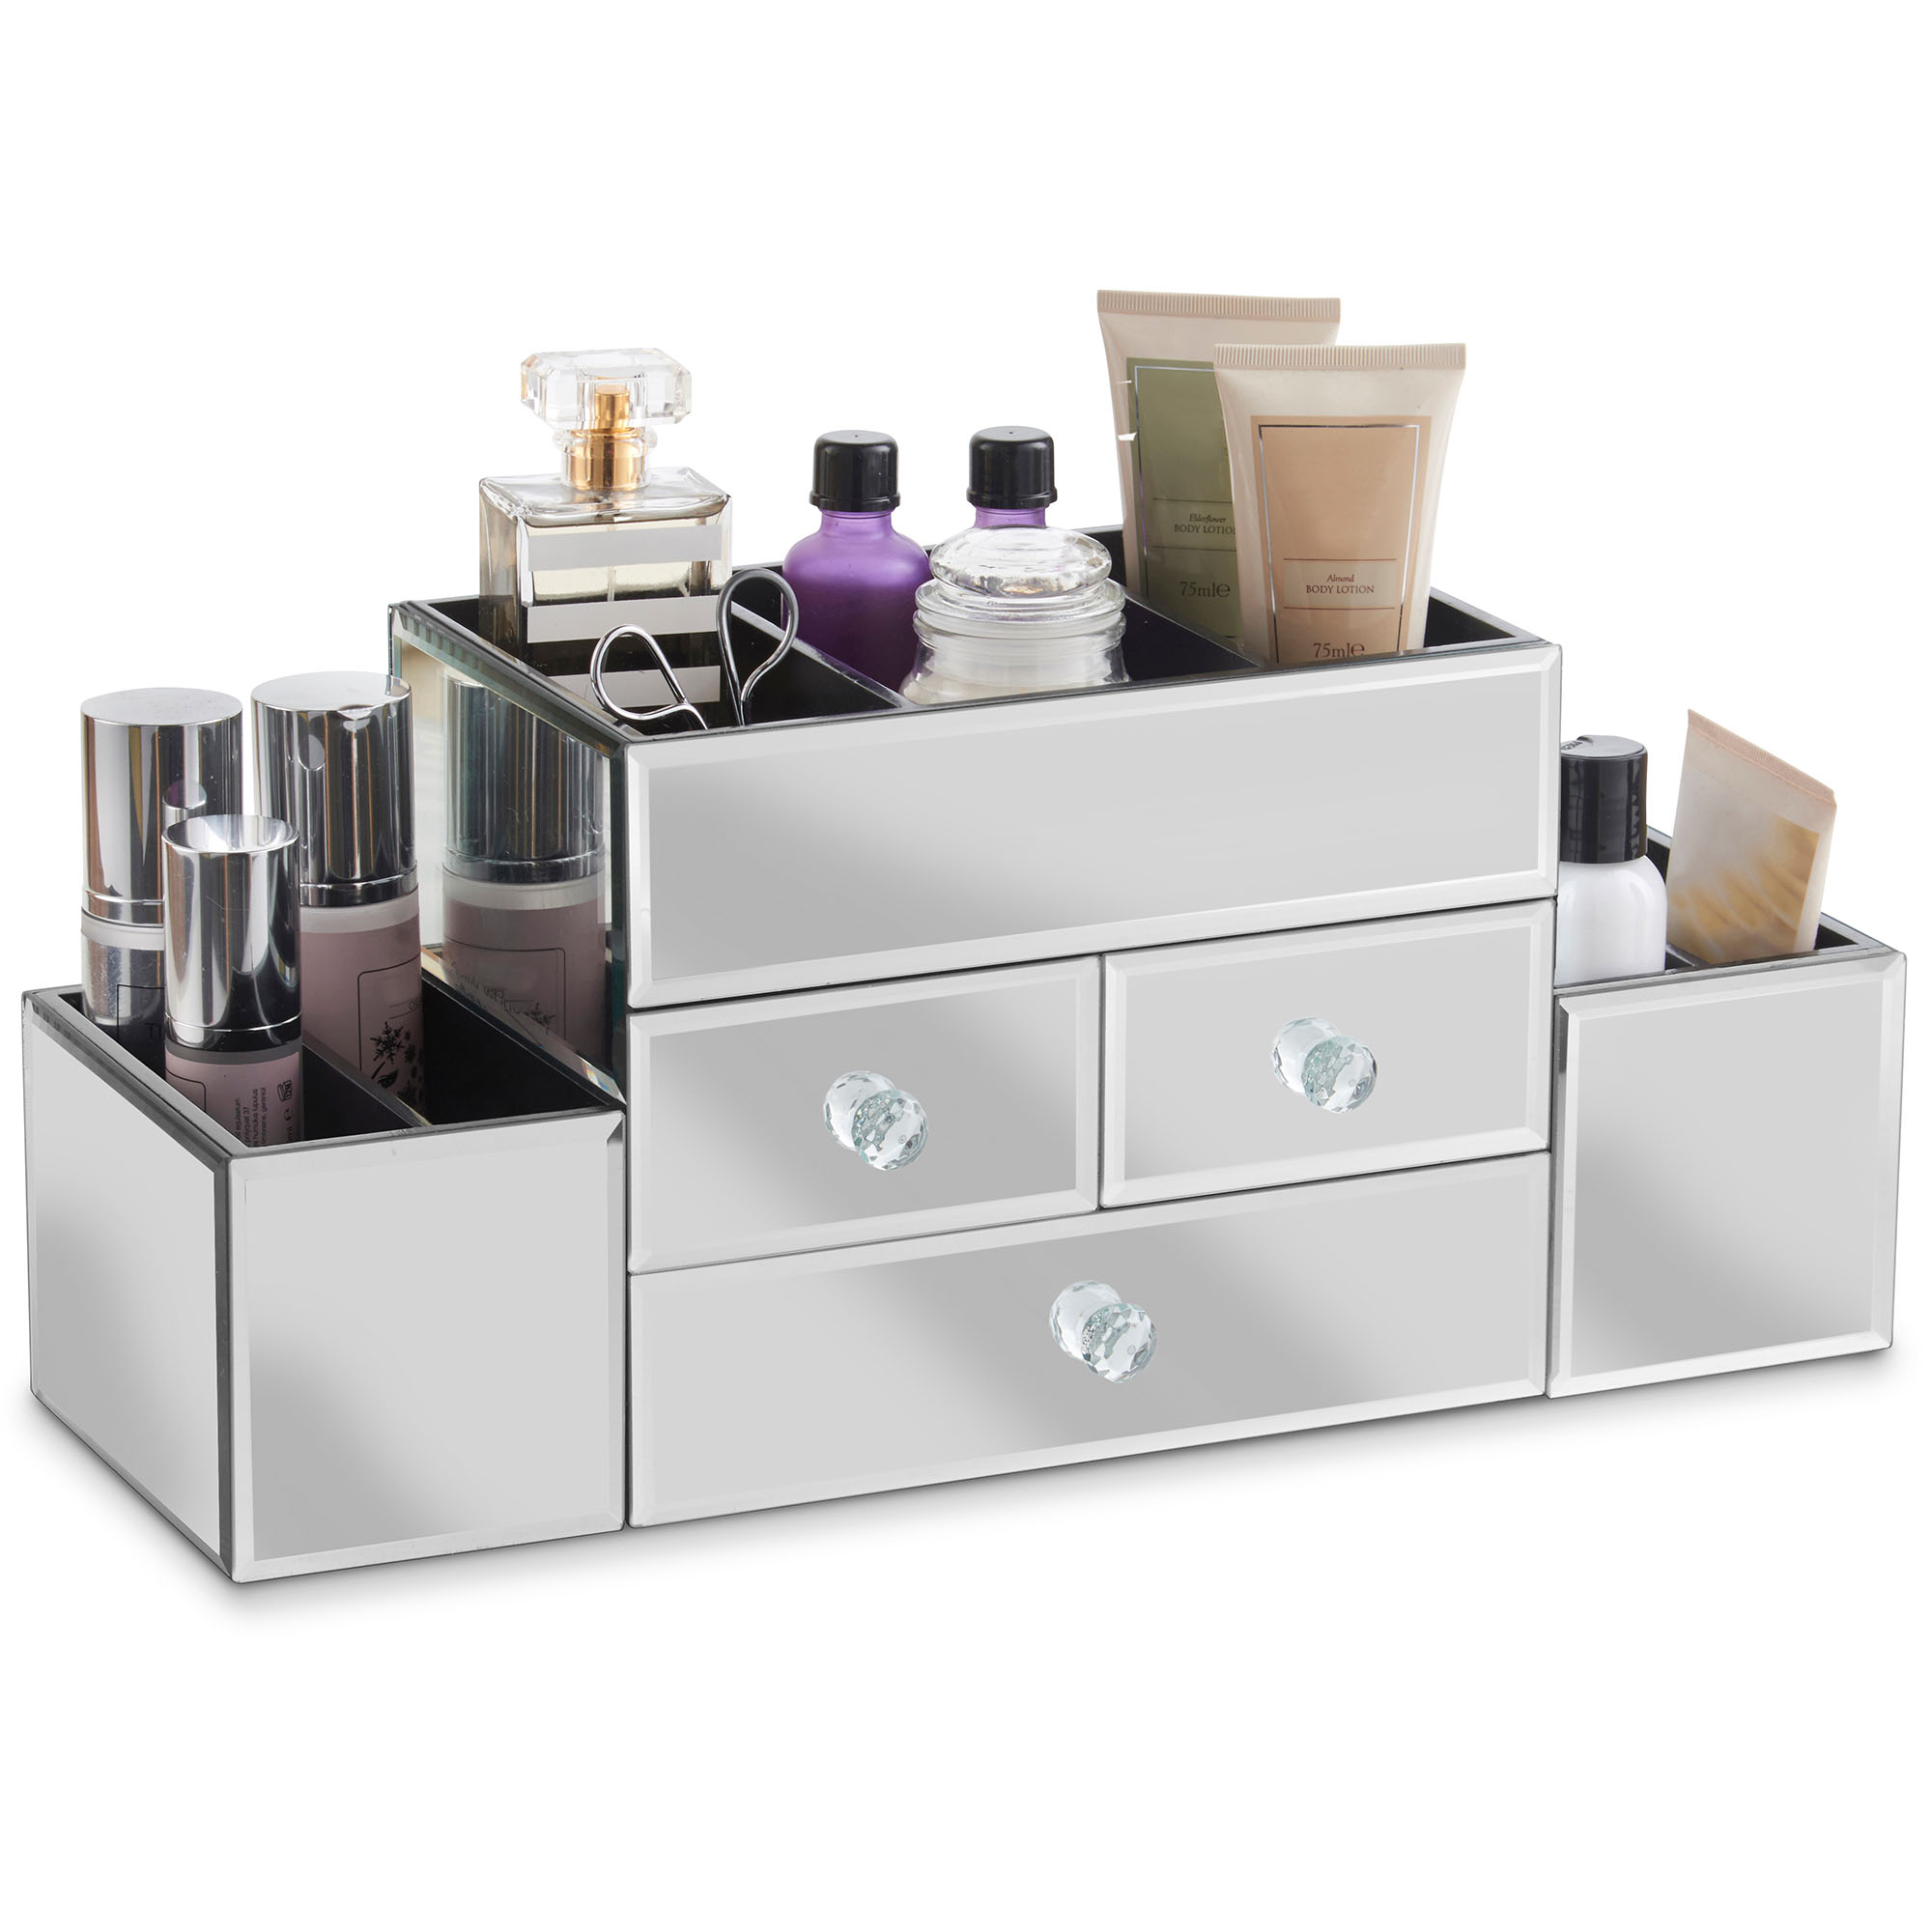 Large makeup organizer with drawers with doors